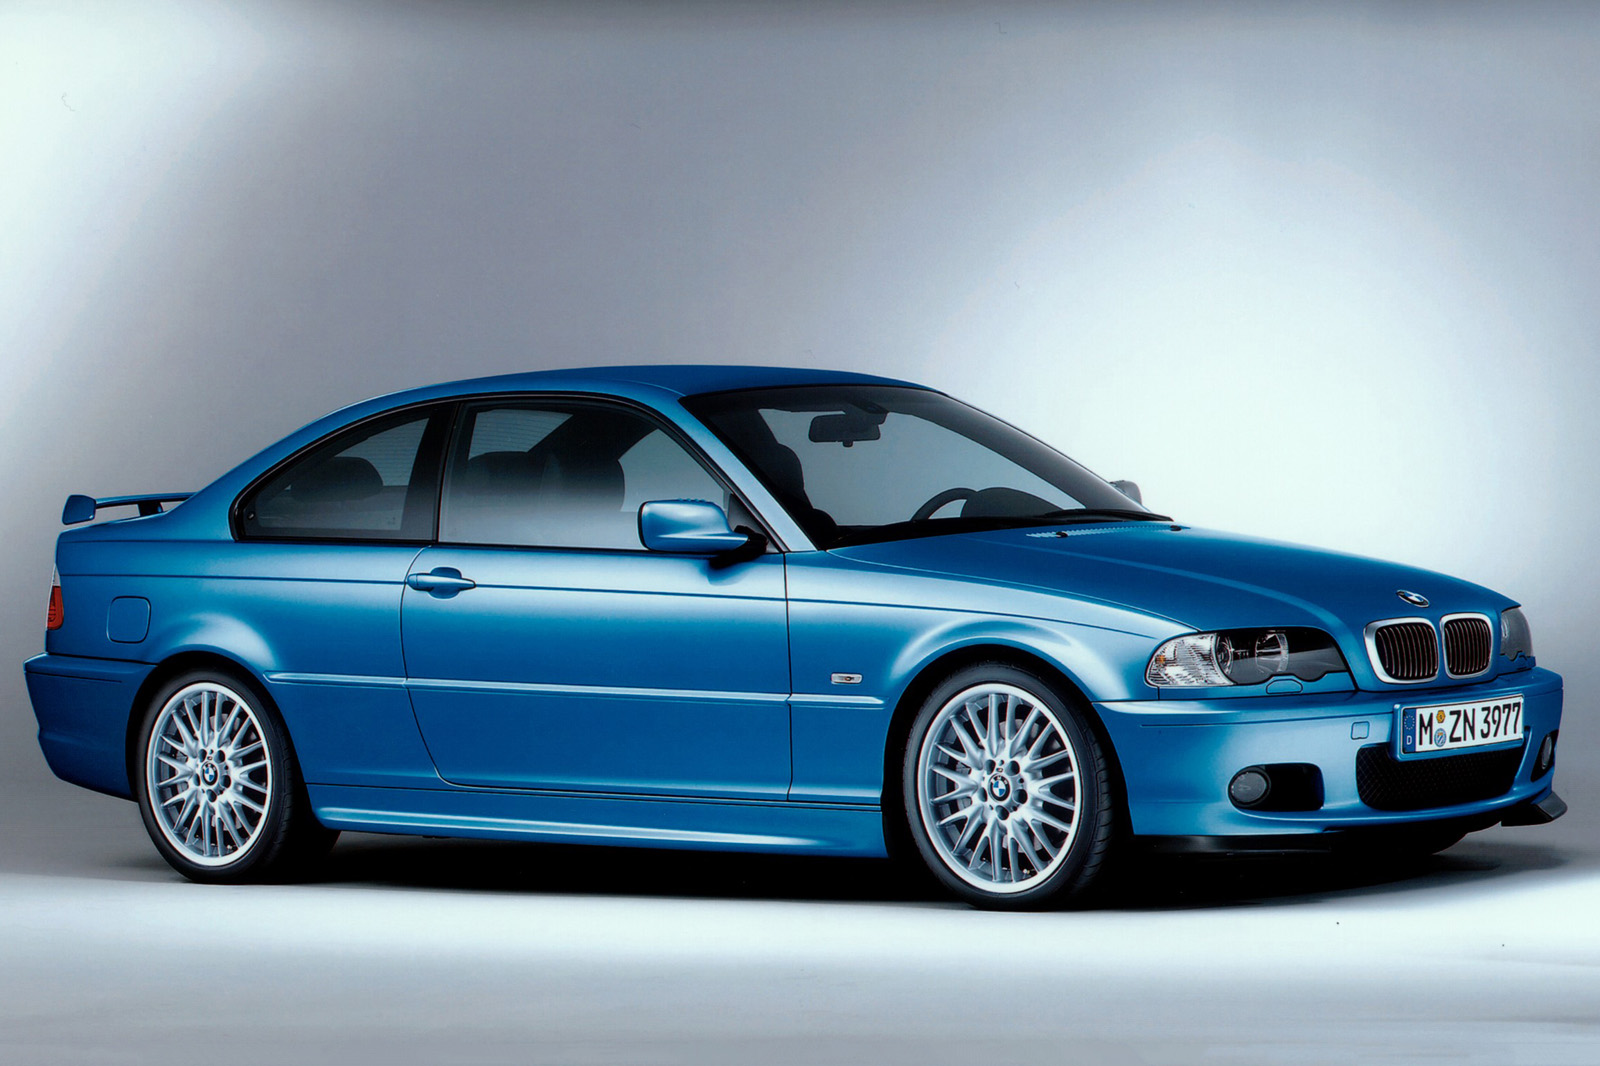 Used car buying guide: BMW 3 Series (E46)